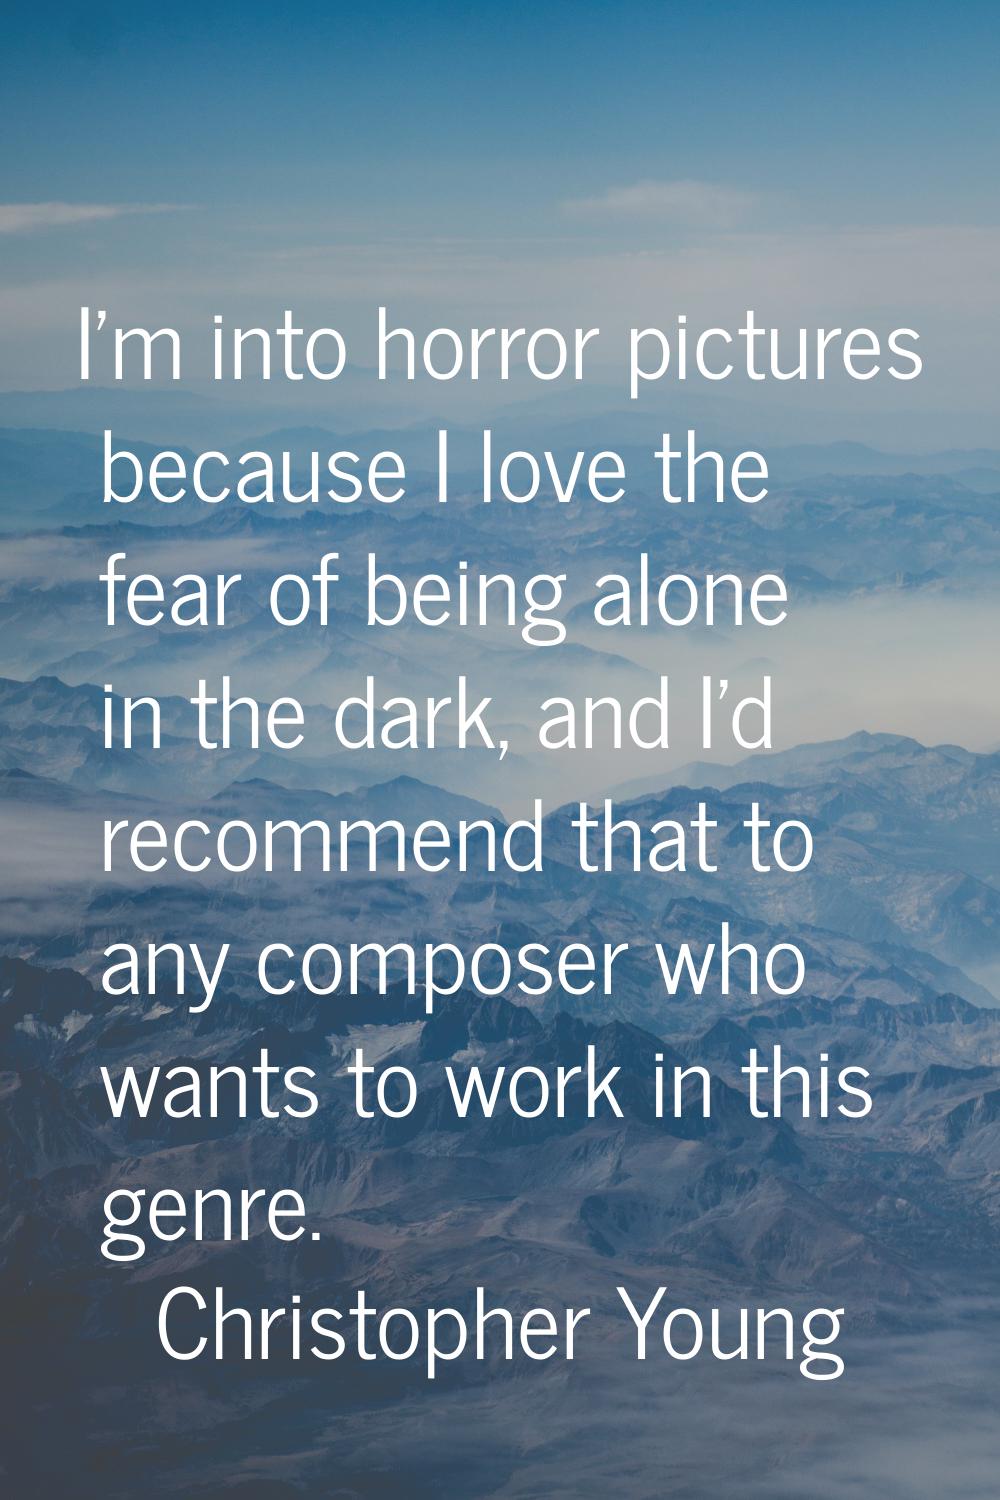 I'm into horror pictures because I love the fear of being alone in the dark, and I'd recommend that